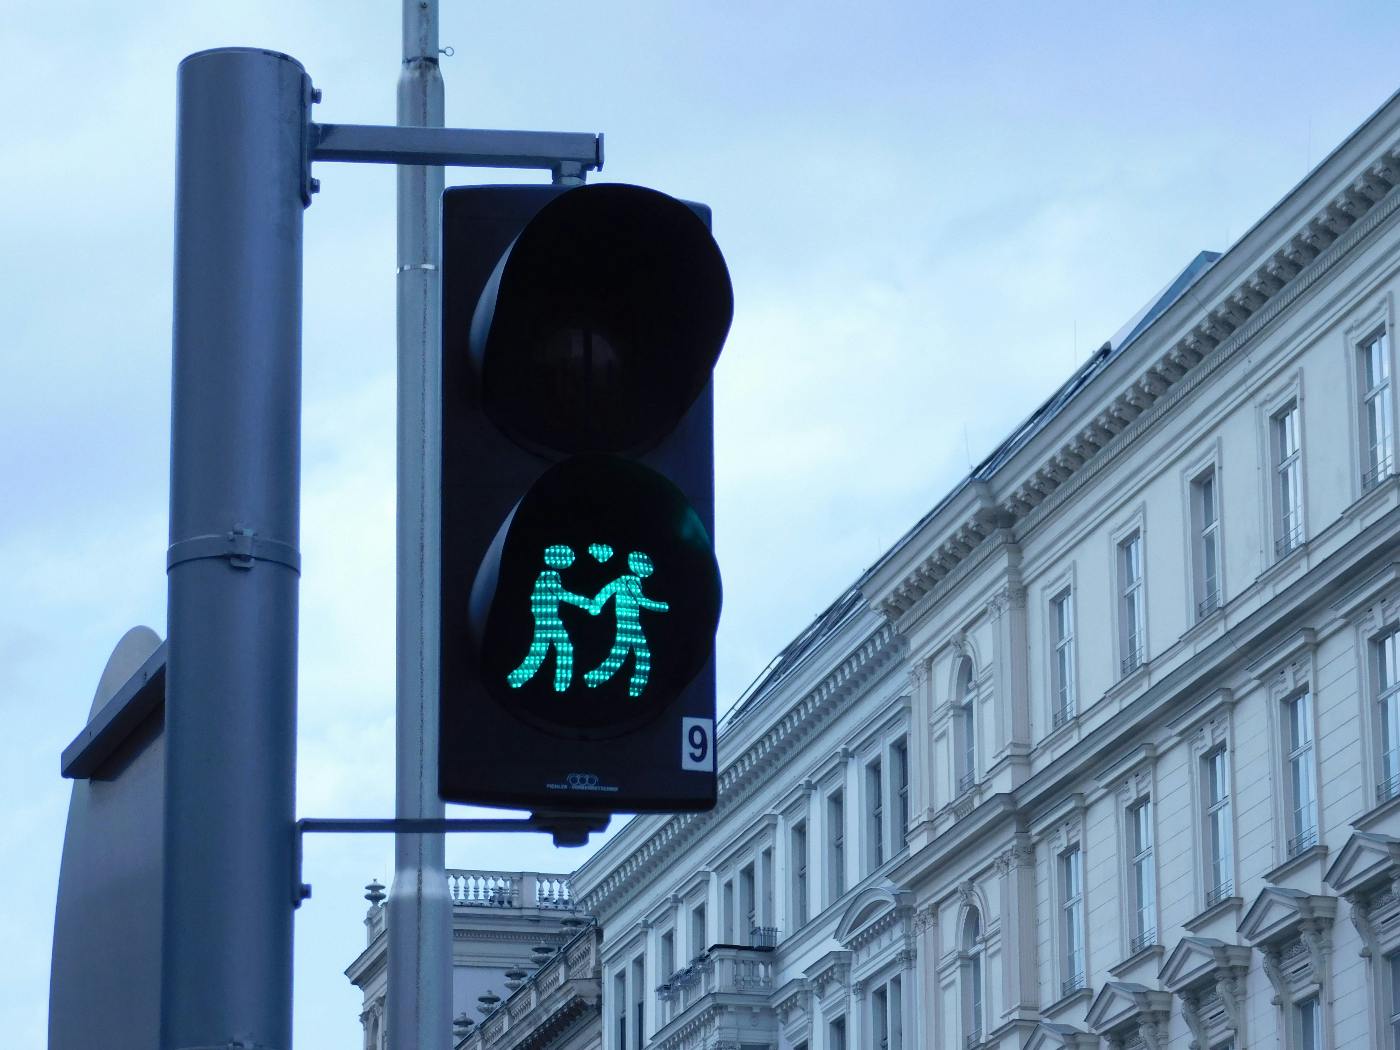 A traffic light with the bottom light displaying a couple holding hands and a heart between them.